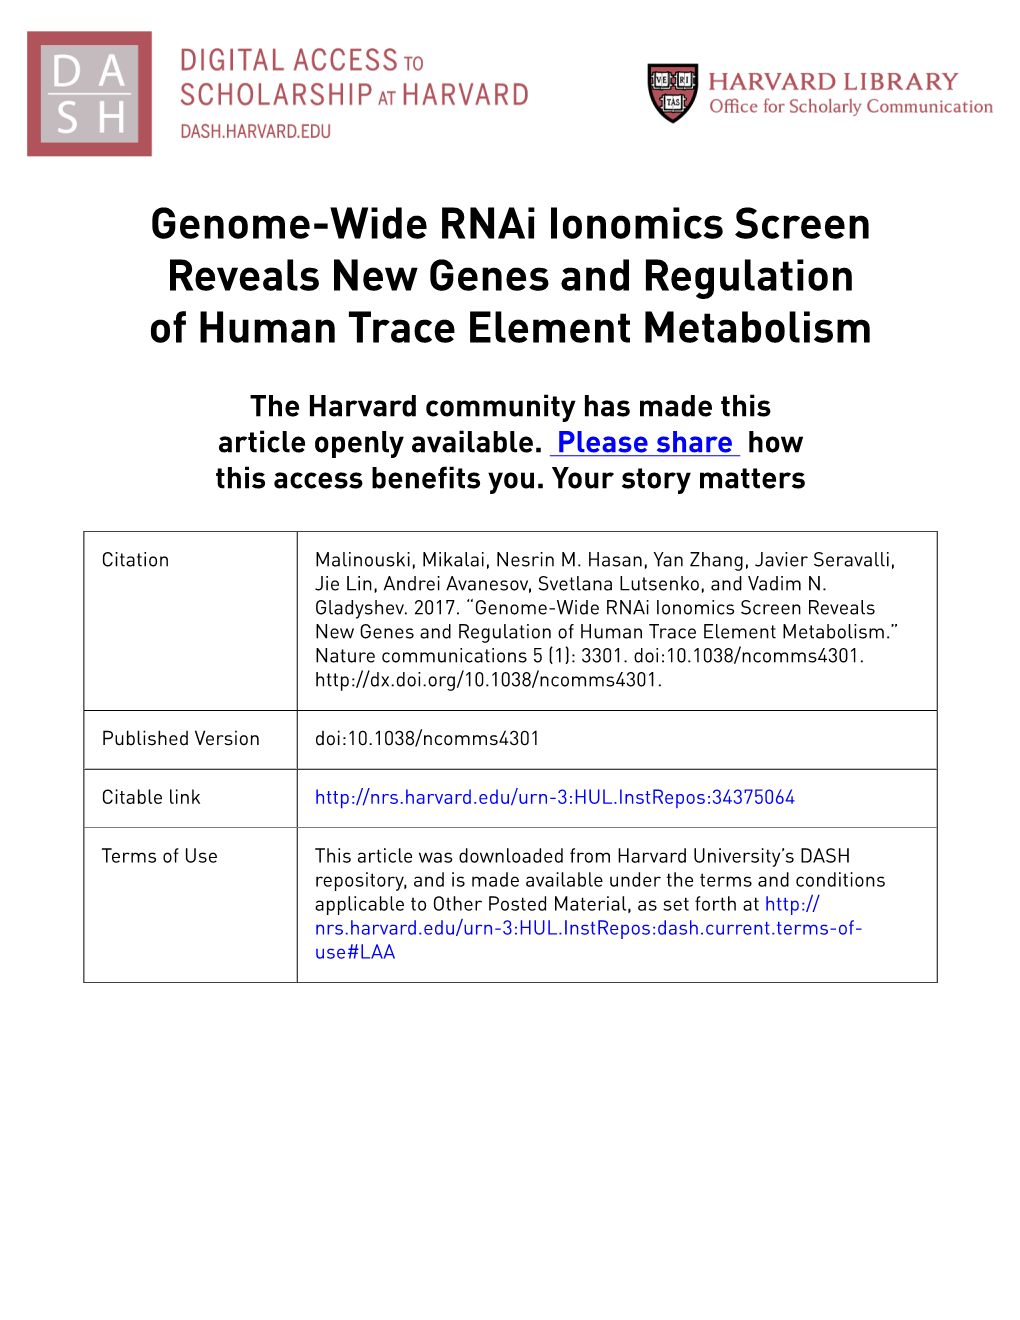 Genome-Wide Rnai Ionomics Screen Reveals New Genes and Regulation of Human Trace Element Metabolism